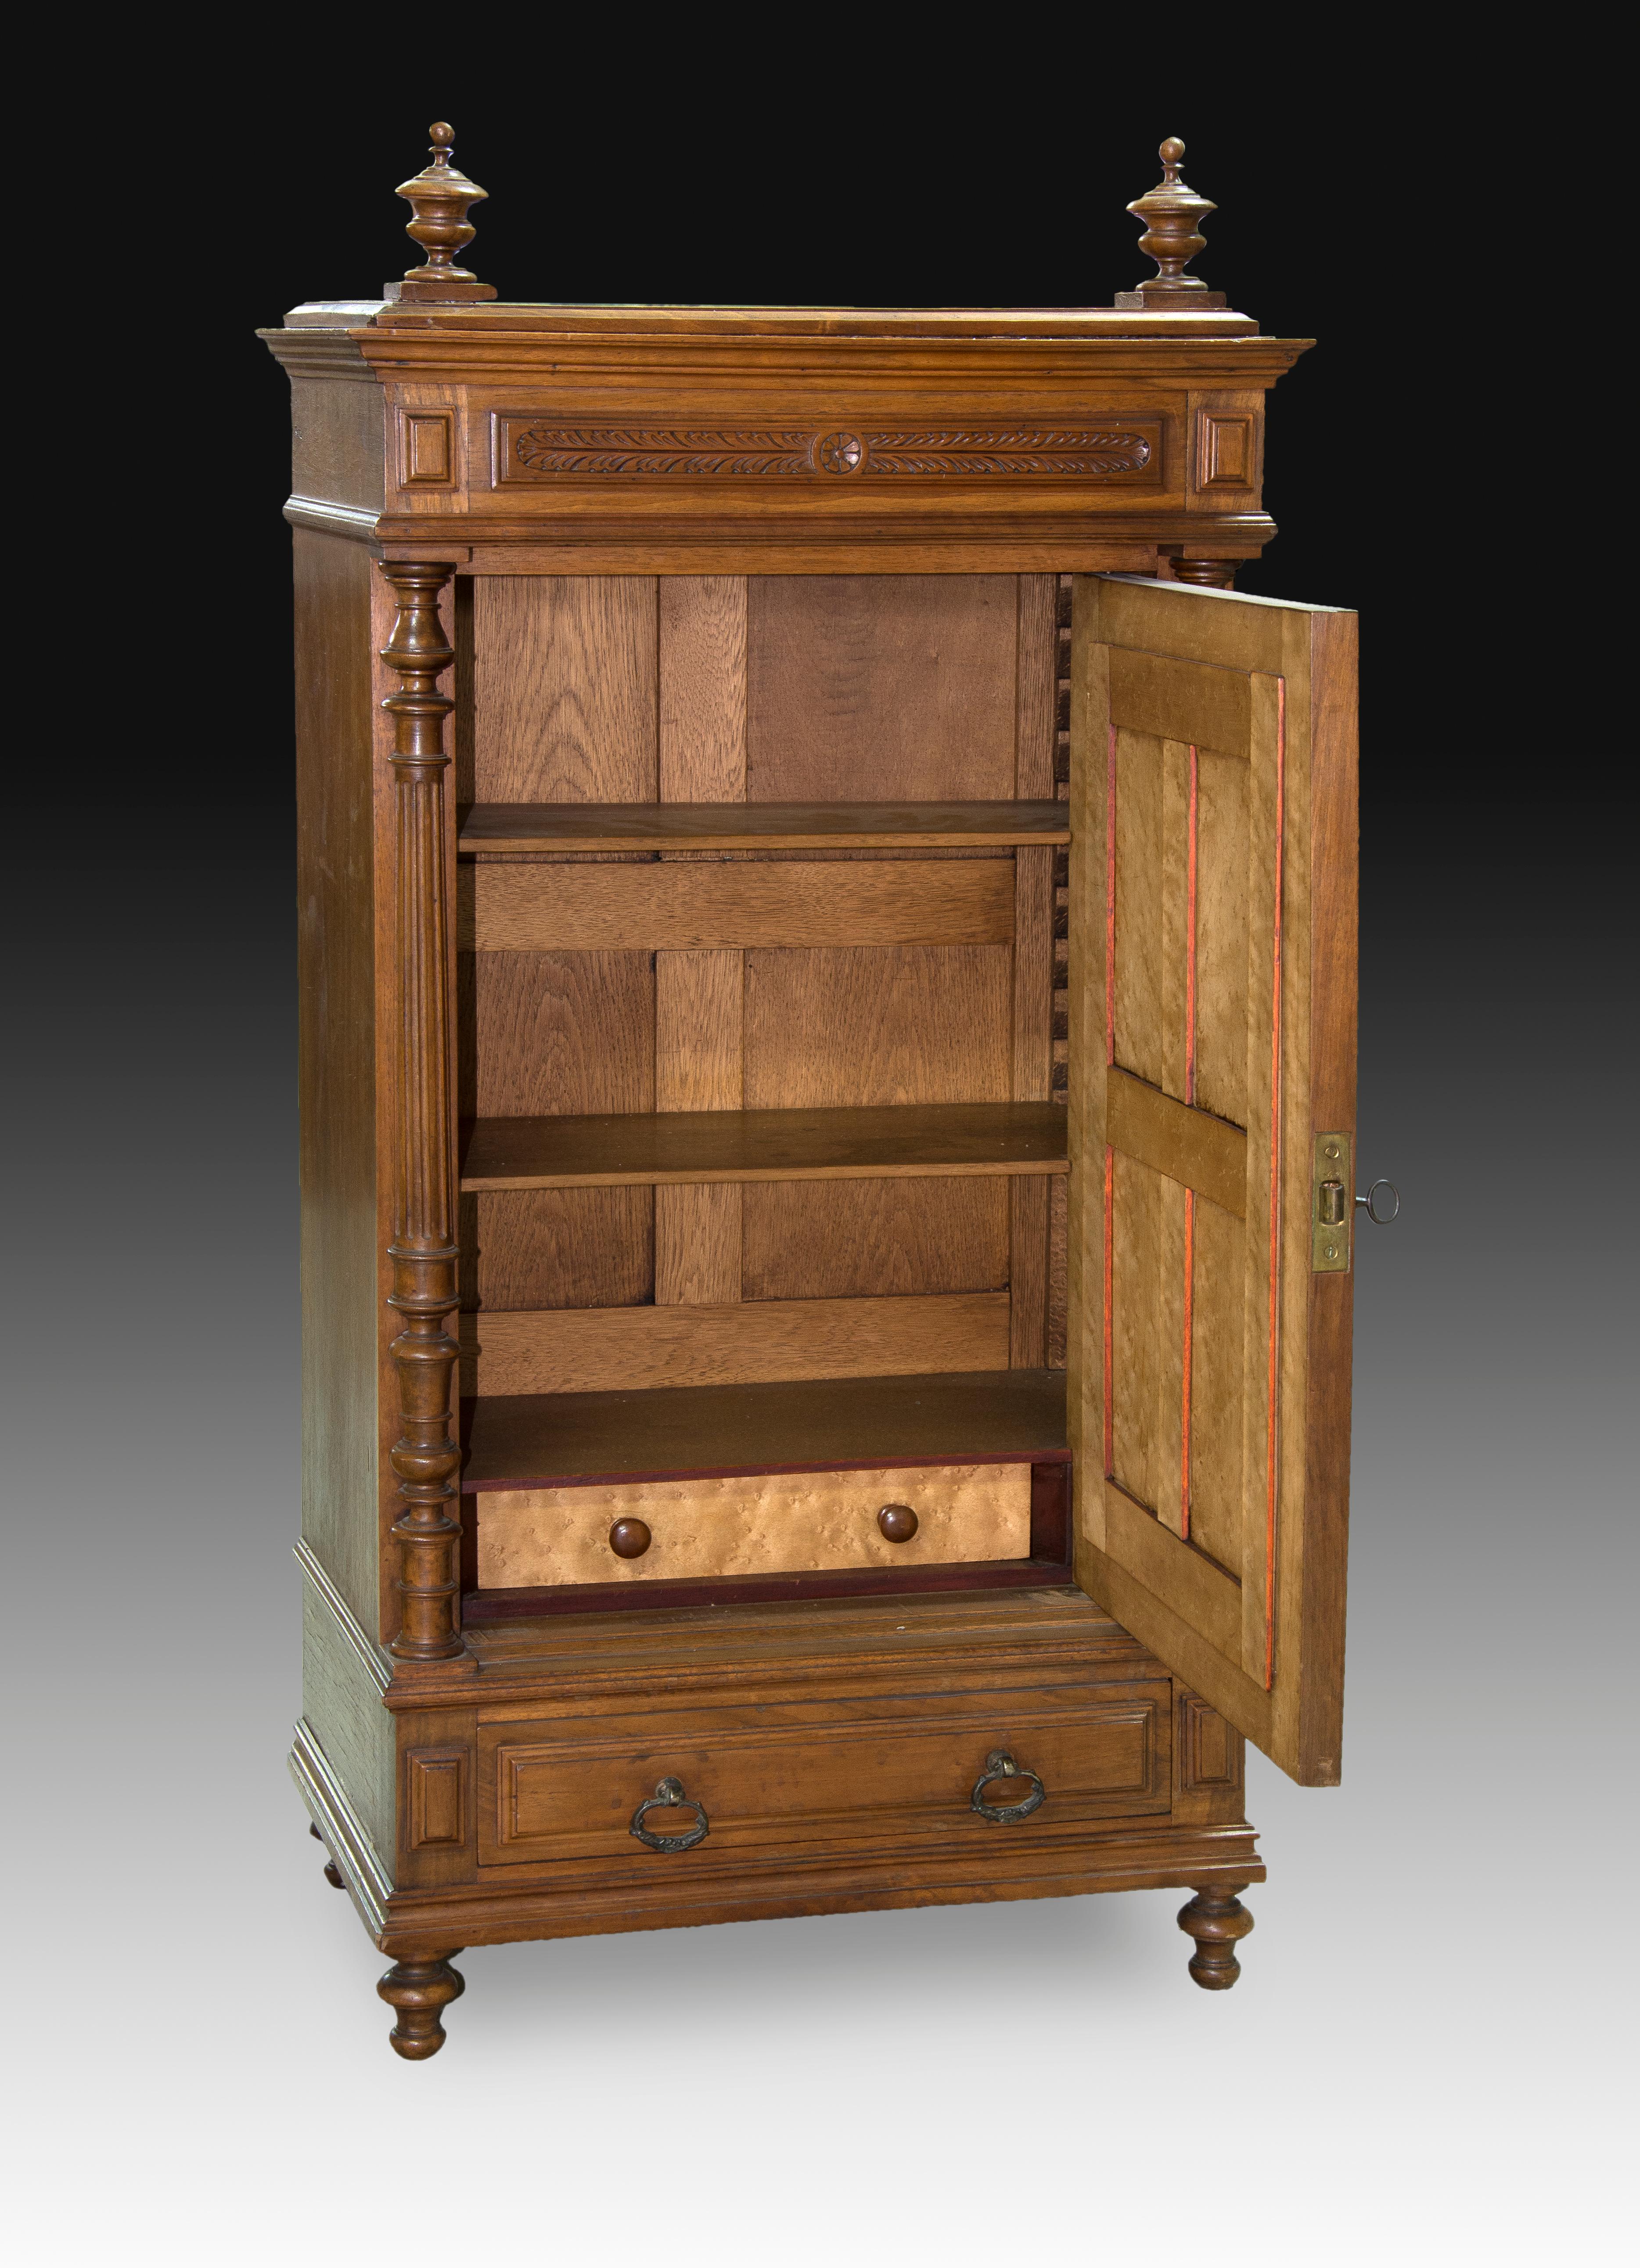 Miniature moon wardrobe. Walnut wood. XIX century. 
Miniature wardrobe with a door (inside, two shelvesand a drawer) and a drawer with two handles, whichhas a mirror on the outside and a decoration based onarchitectural elements, plants and